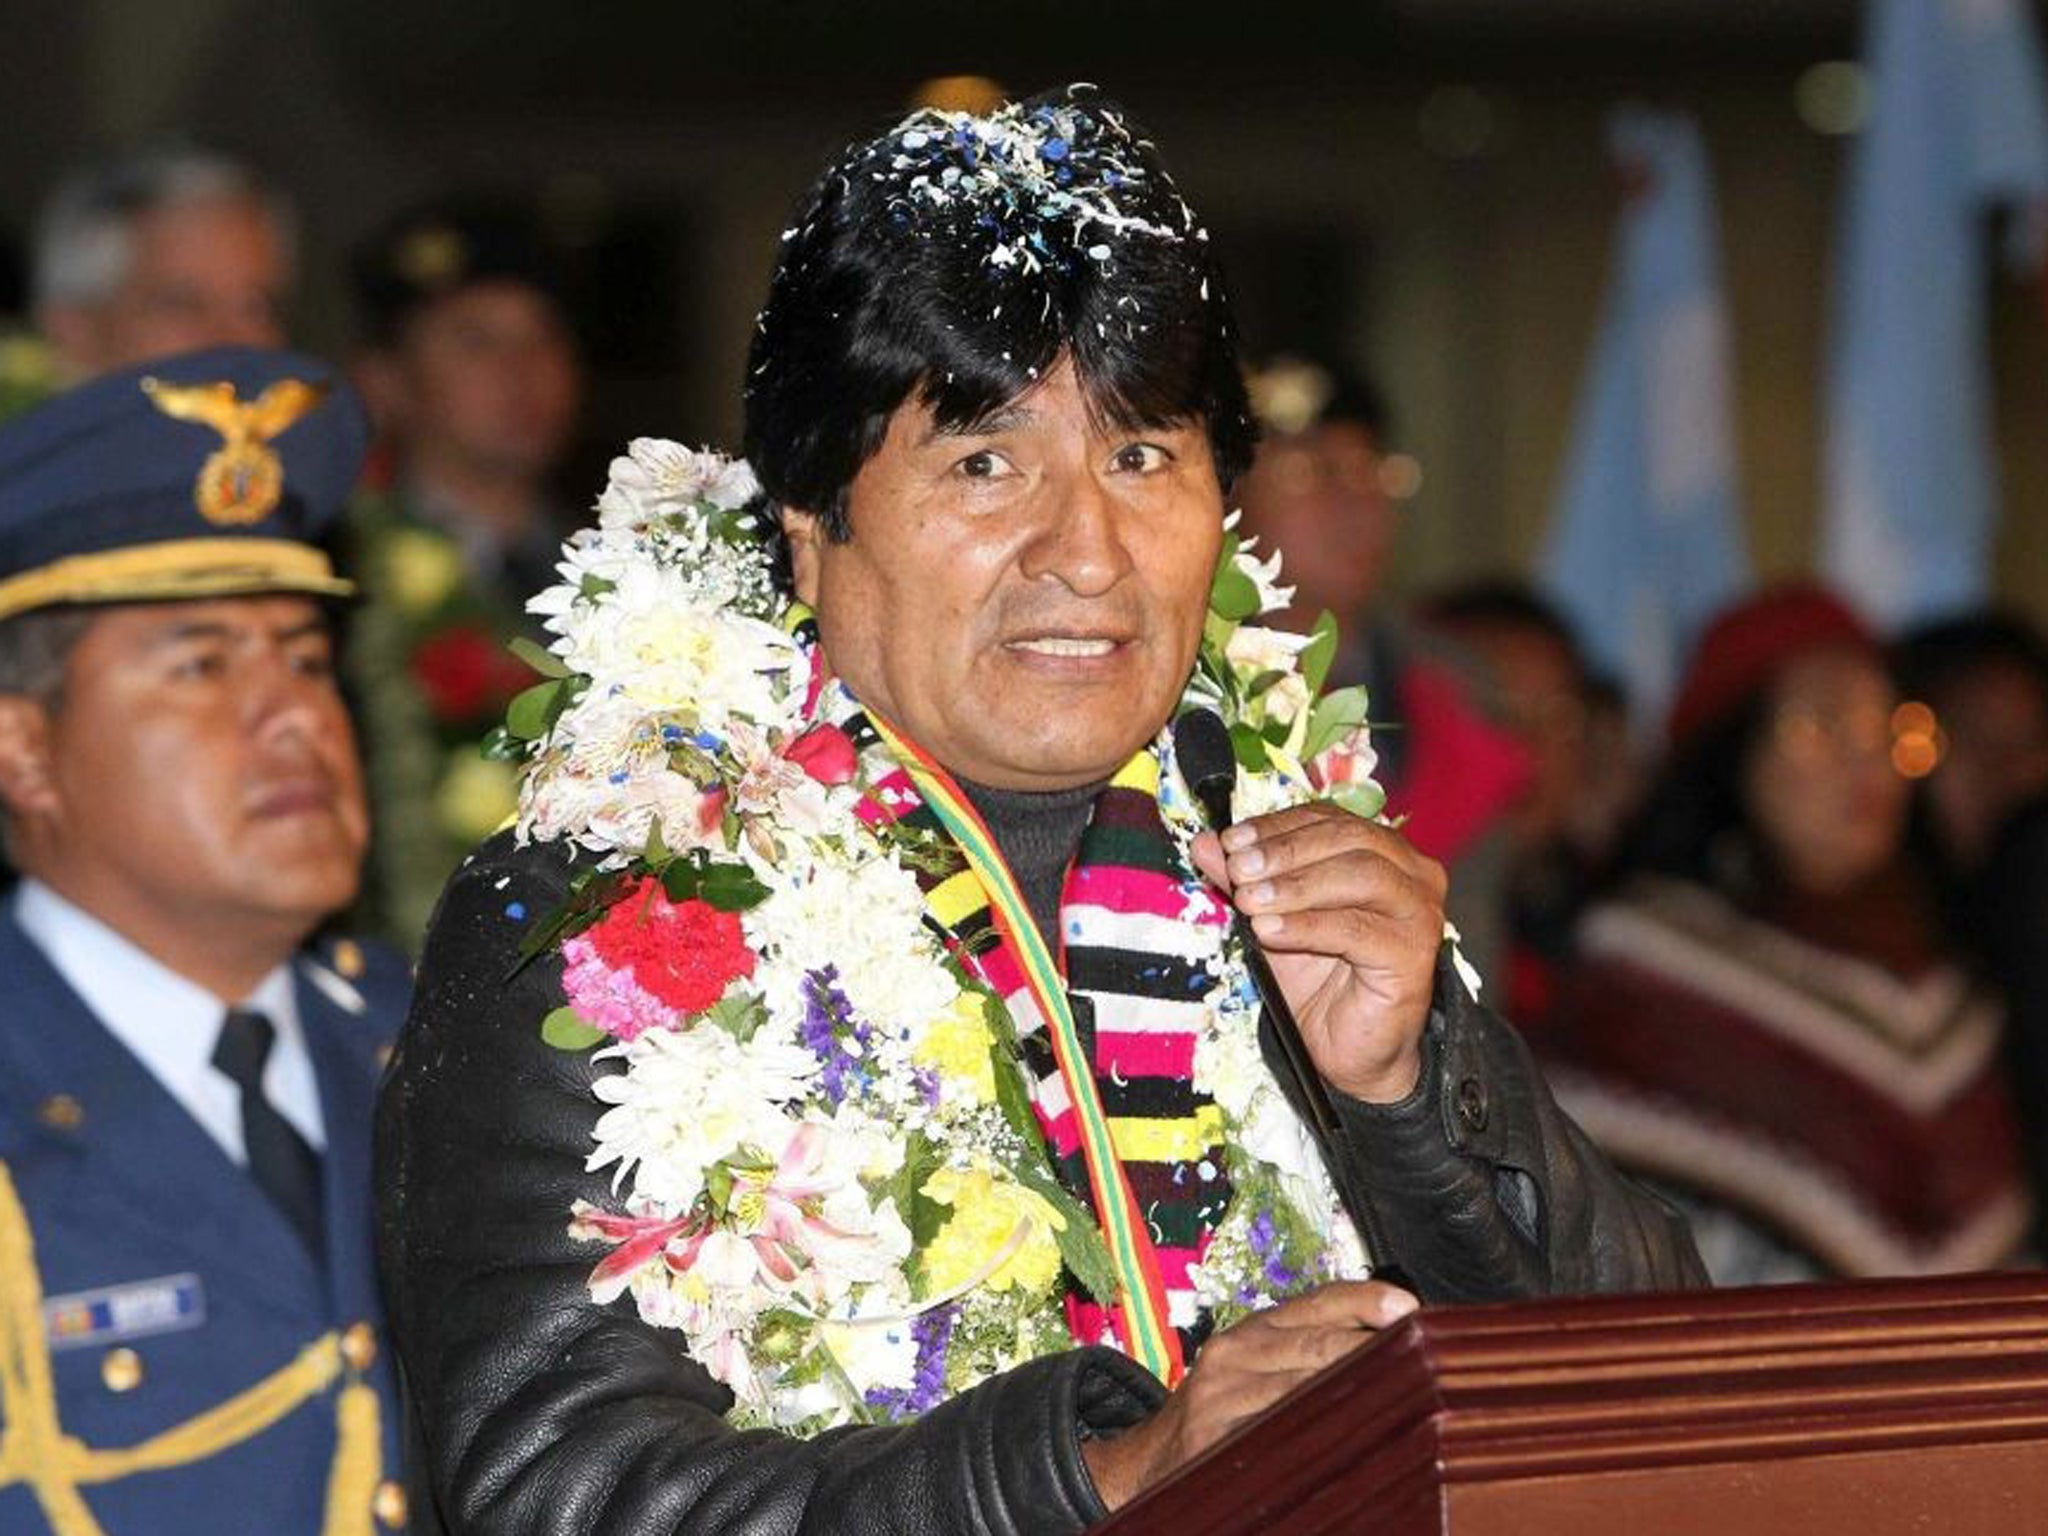 Bolivia President Evo Morales delivers a speech upon his arrival in La Paz, Bolivia, after an enforced stopover in Austria